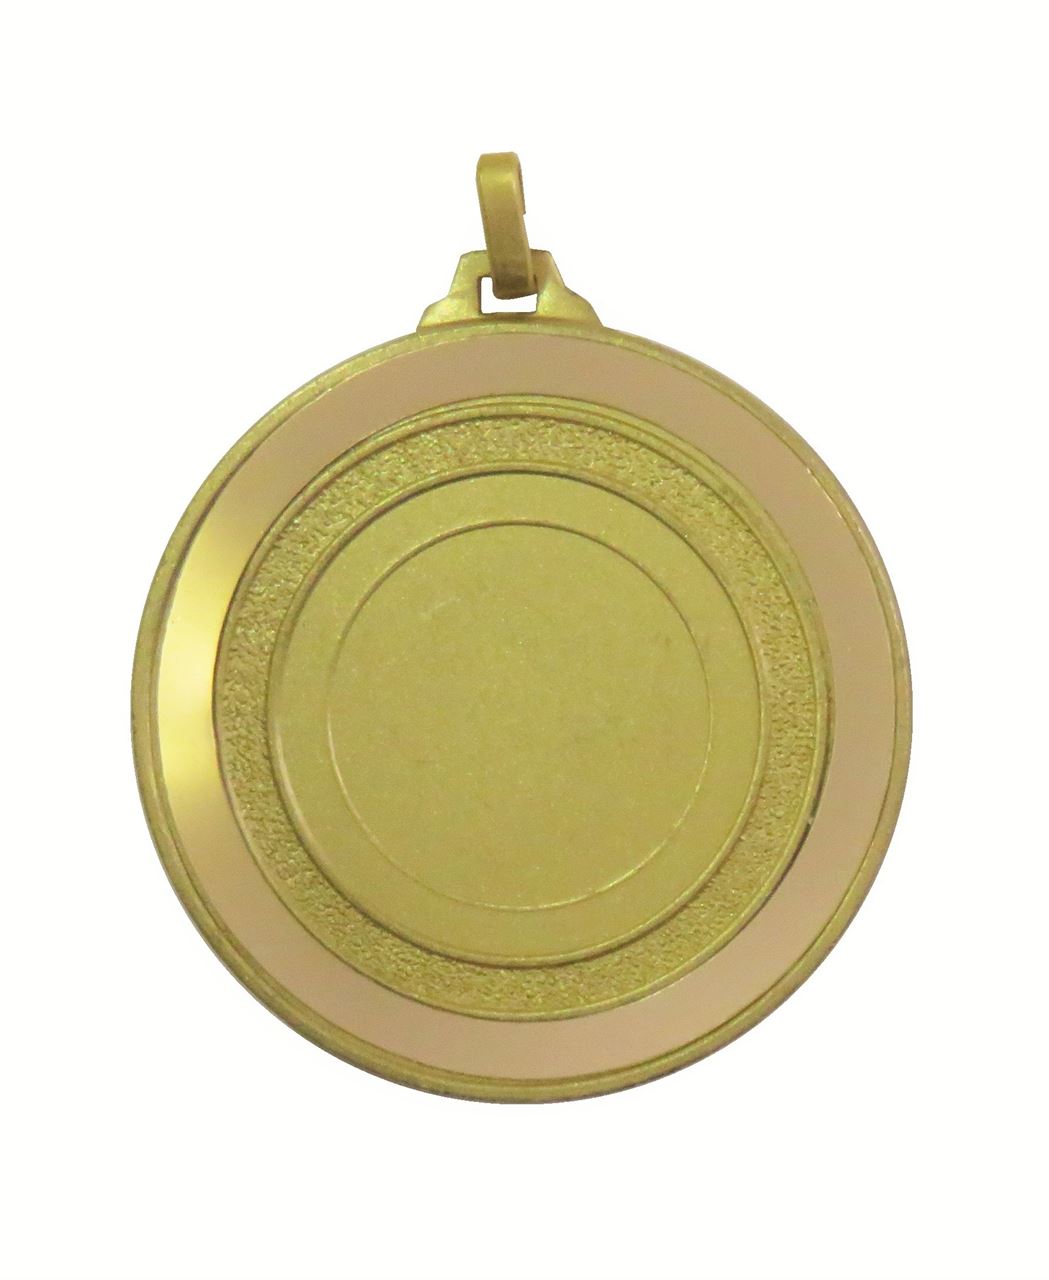 Gold Mirror Edge Medal (size: 52mm) - 5818M